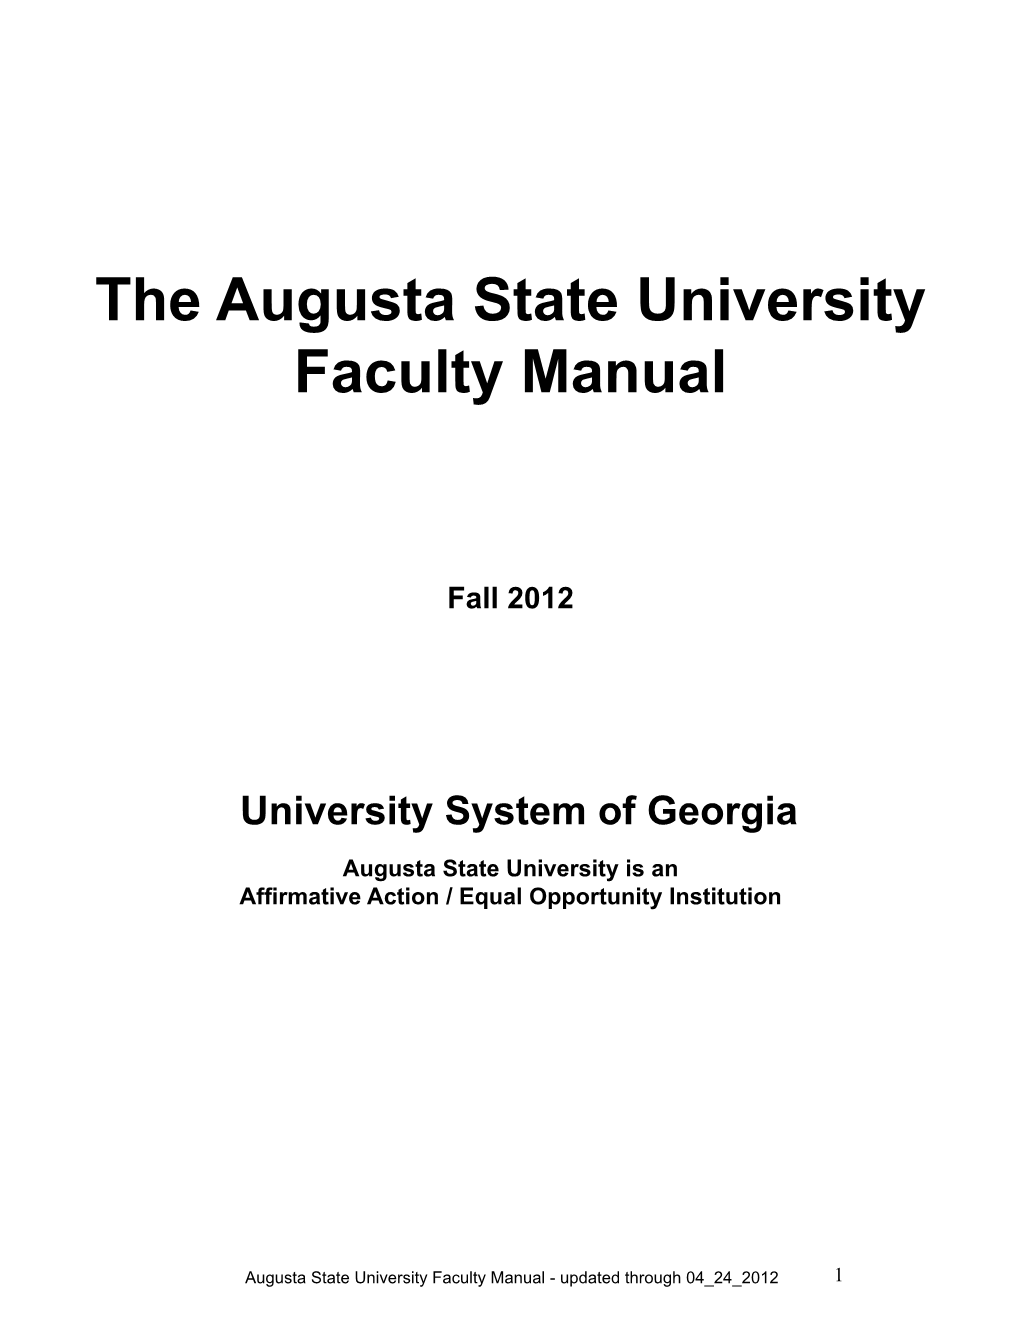 The Augusta State University Faculty Manual